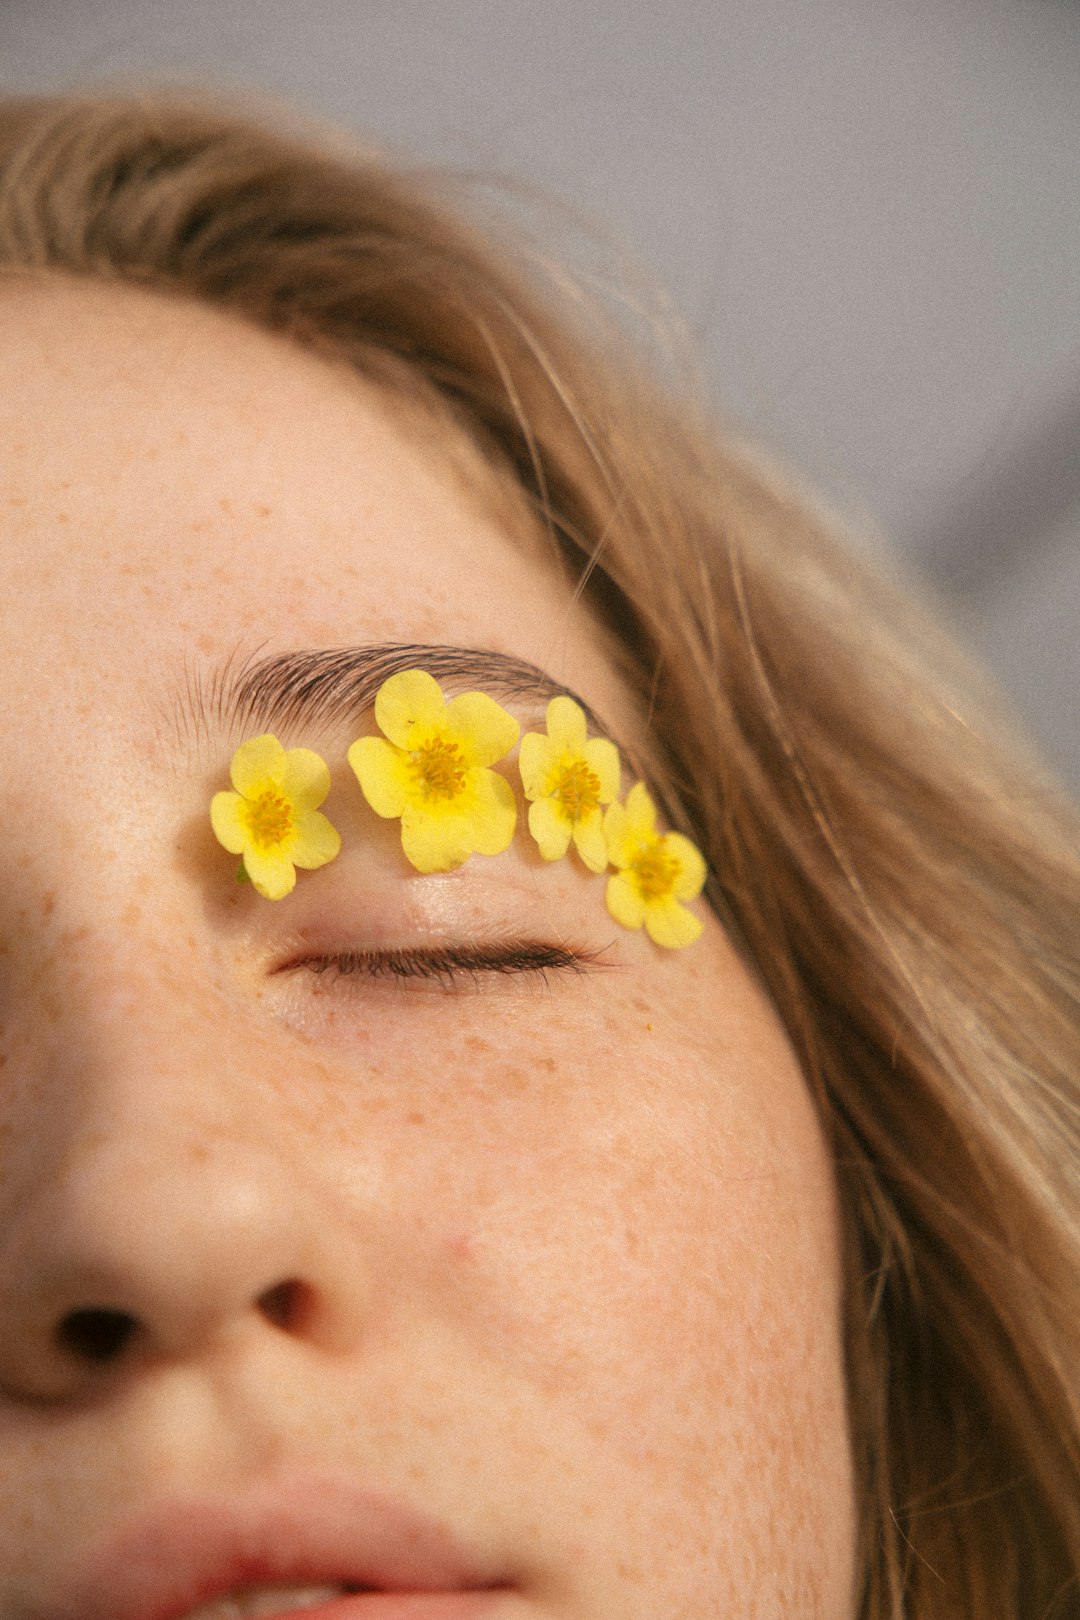 woman with yellow flower on her ear